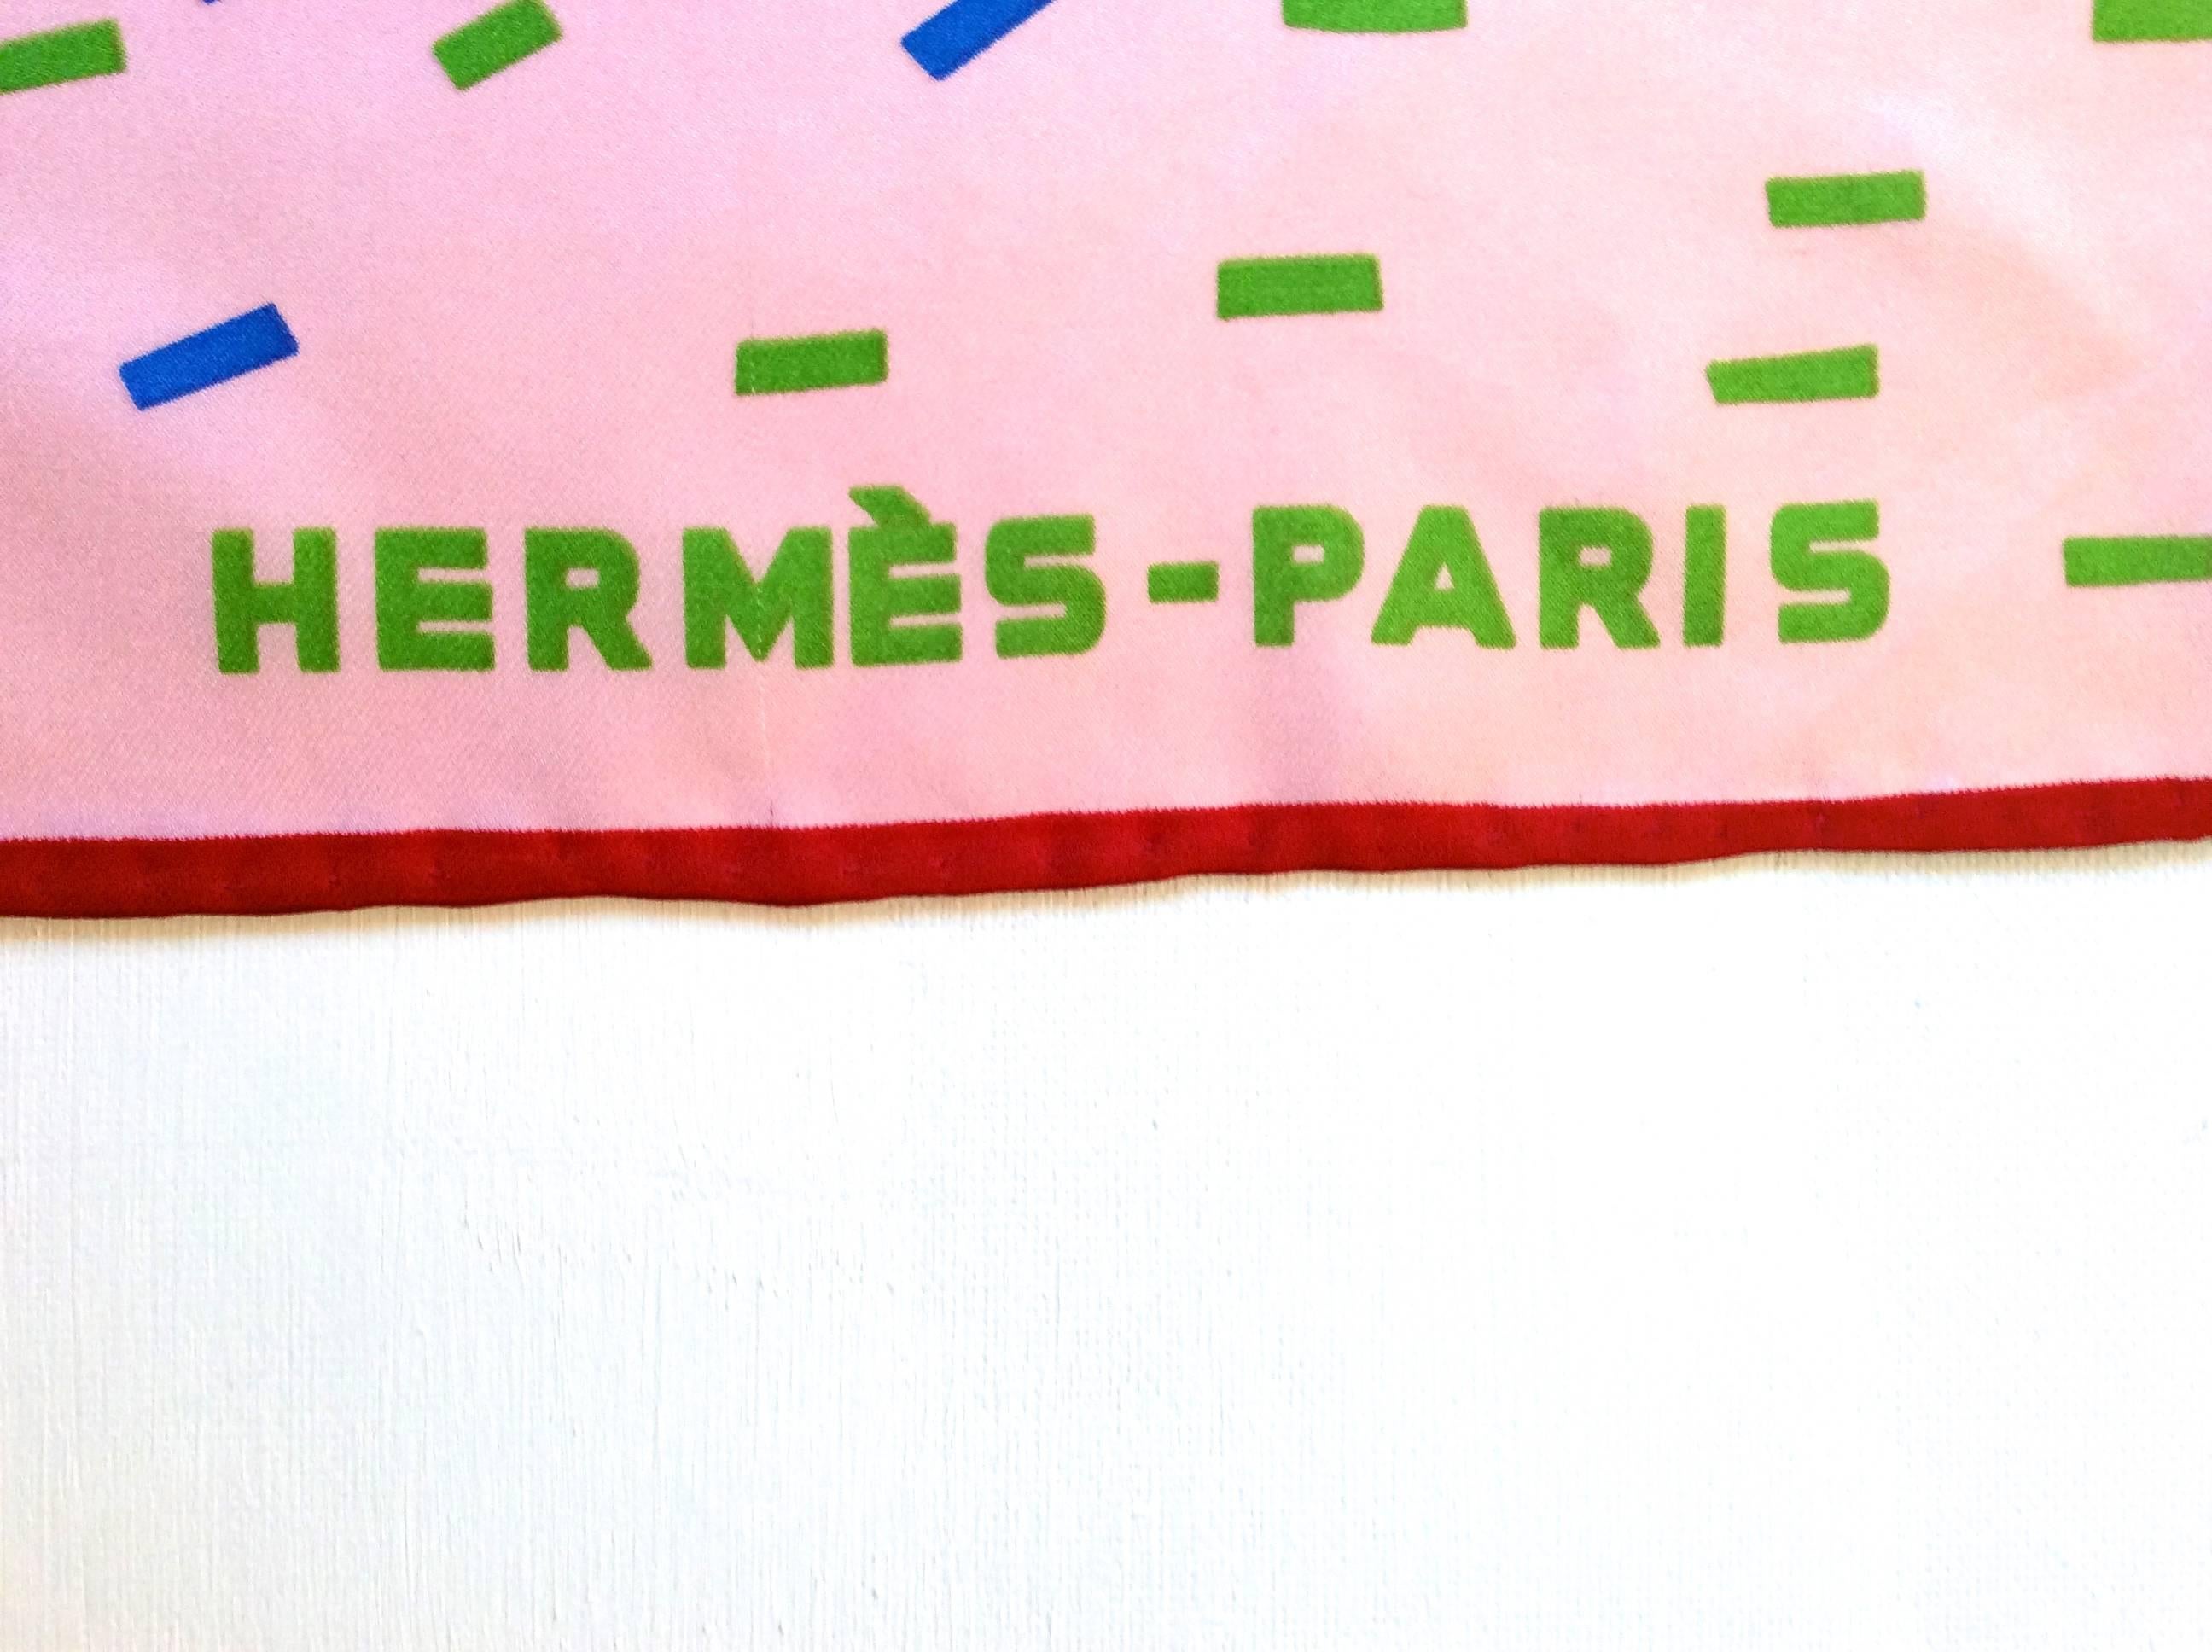 Presented here is a scarf by Hermes Paris. The scarf is 100% silk and is an image of fireworks with a pink backdrop. The scarf is versatile for various outfits and occasions. An excellent example of the design work from the artists at Hermes. The